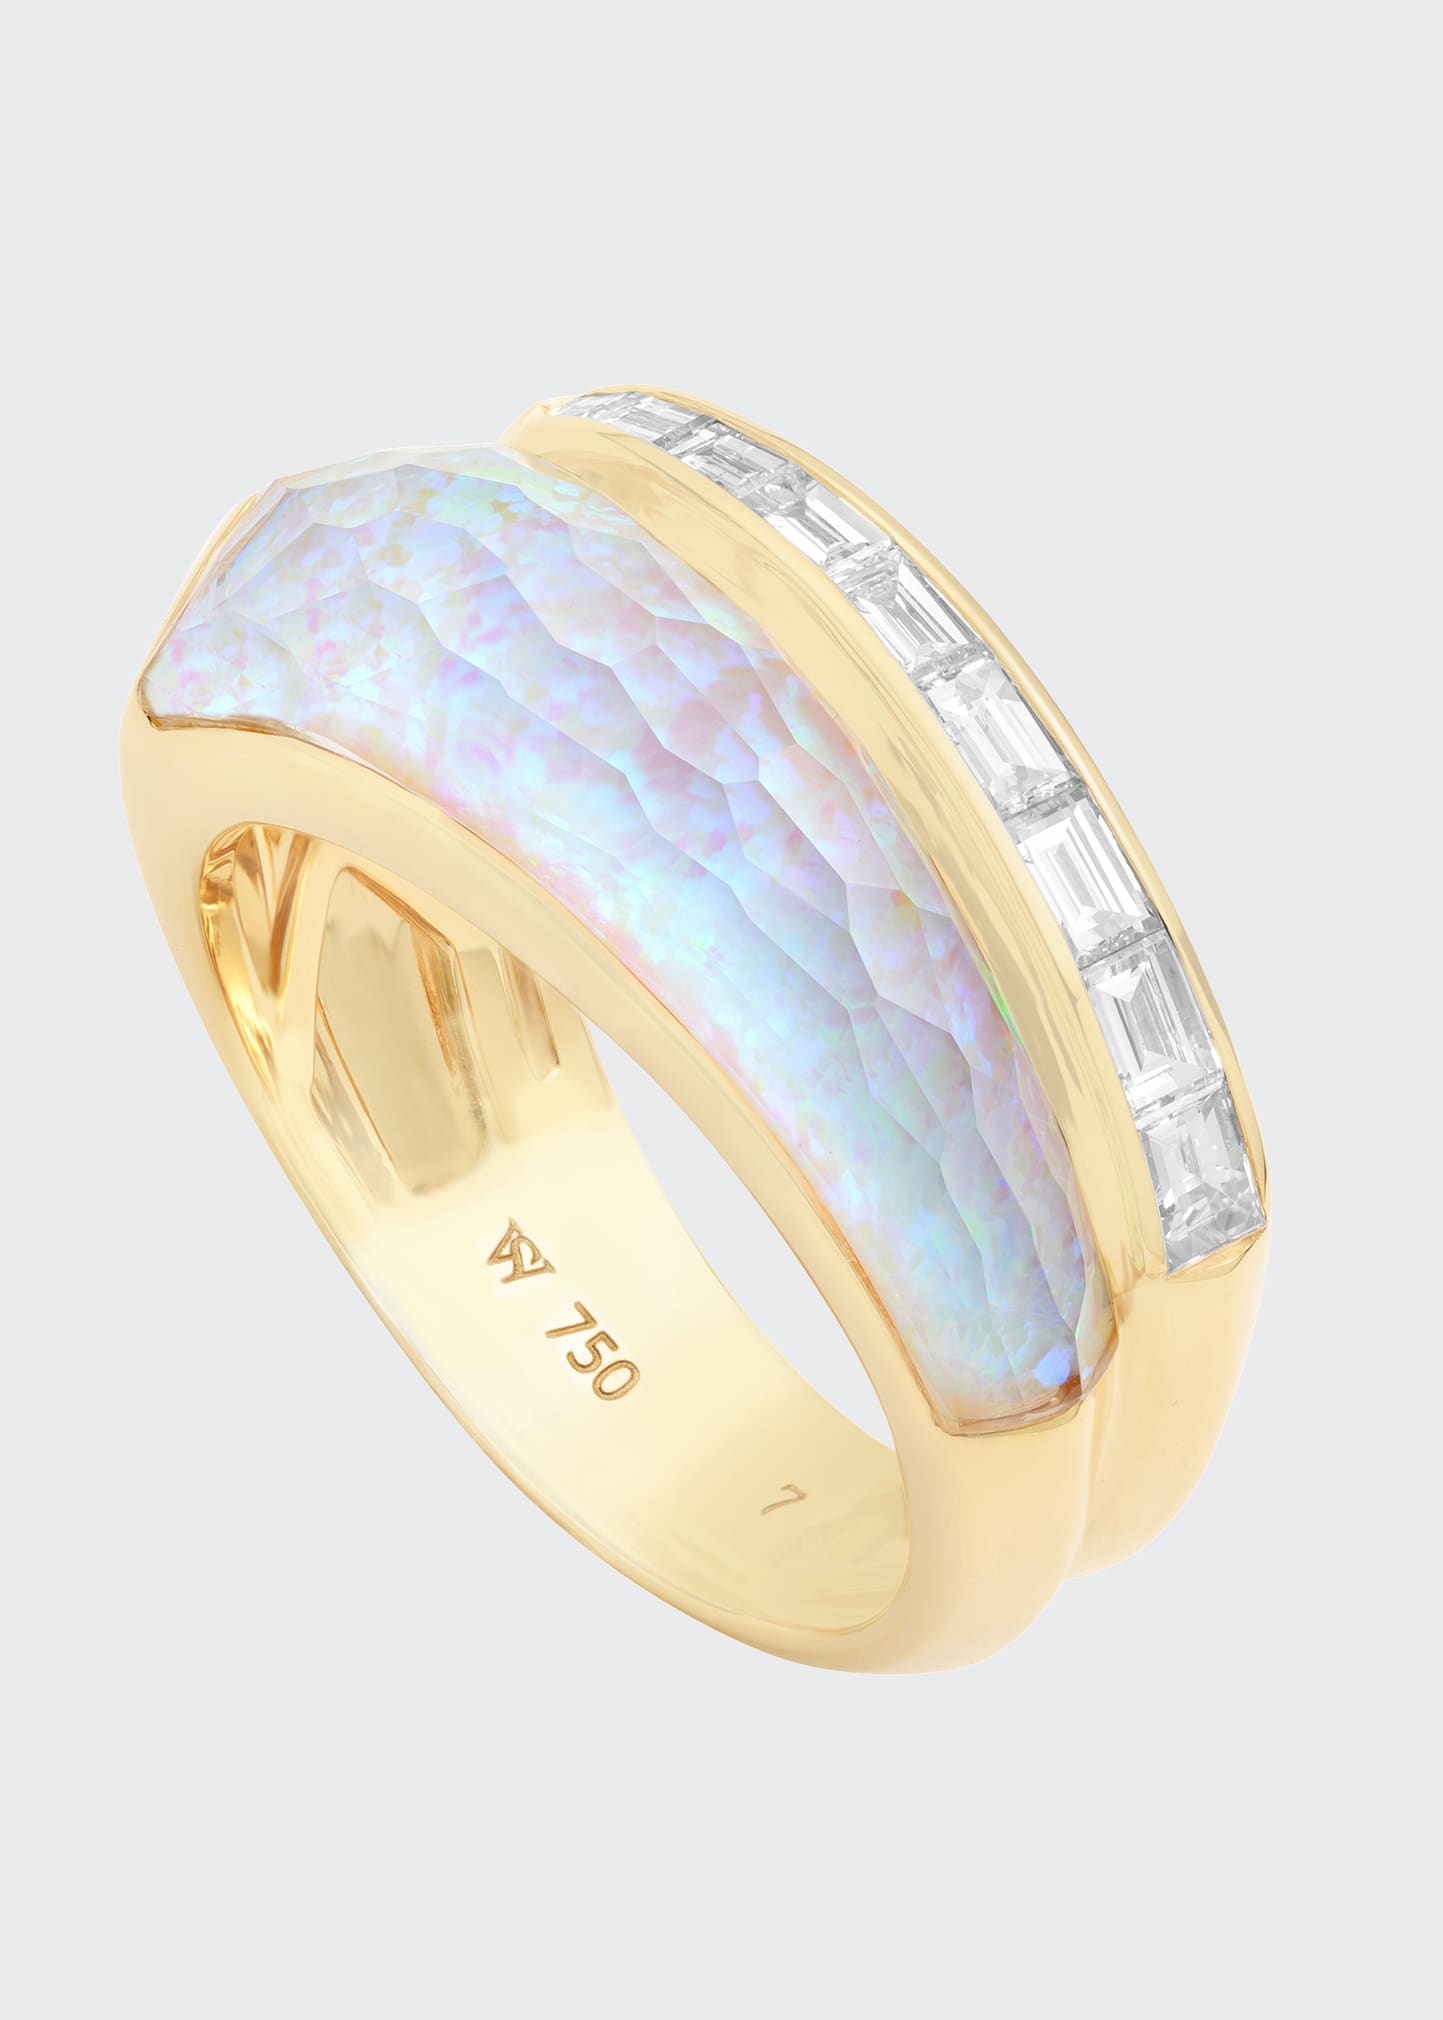 CH2 Slimline Ring in 18K Yellow Gold with Clear Quartz Crystal Haze